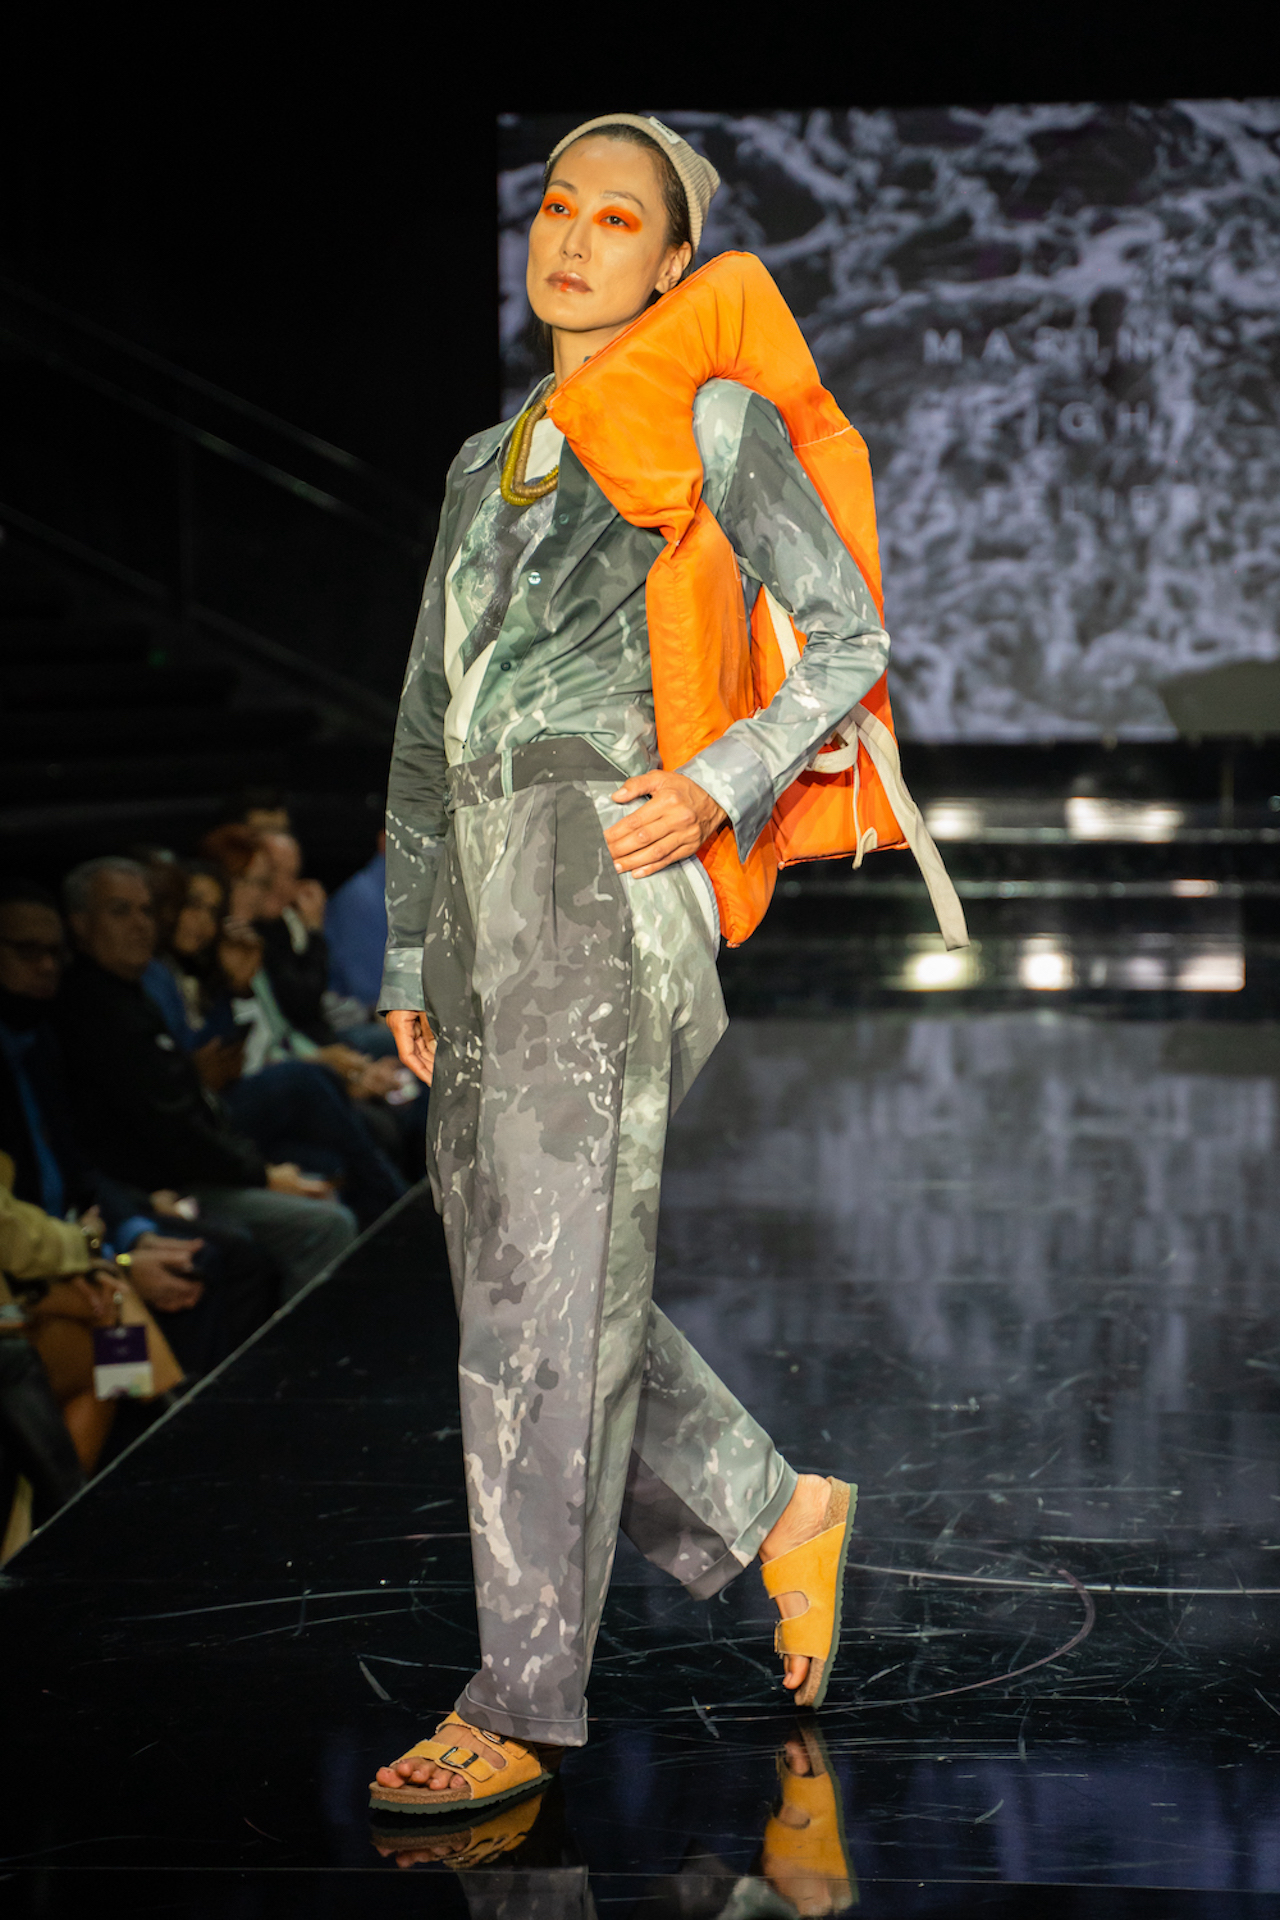 A model walks the runway in an ocean-inspired shirt and pants accessorized with an orange life vest on the shoulder